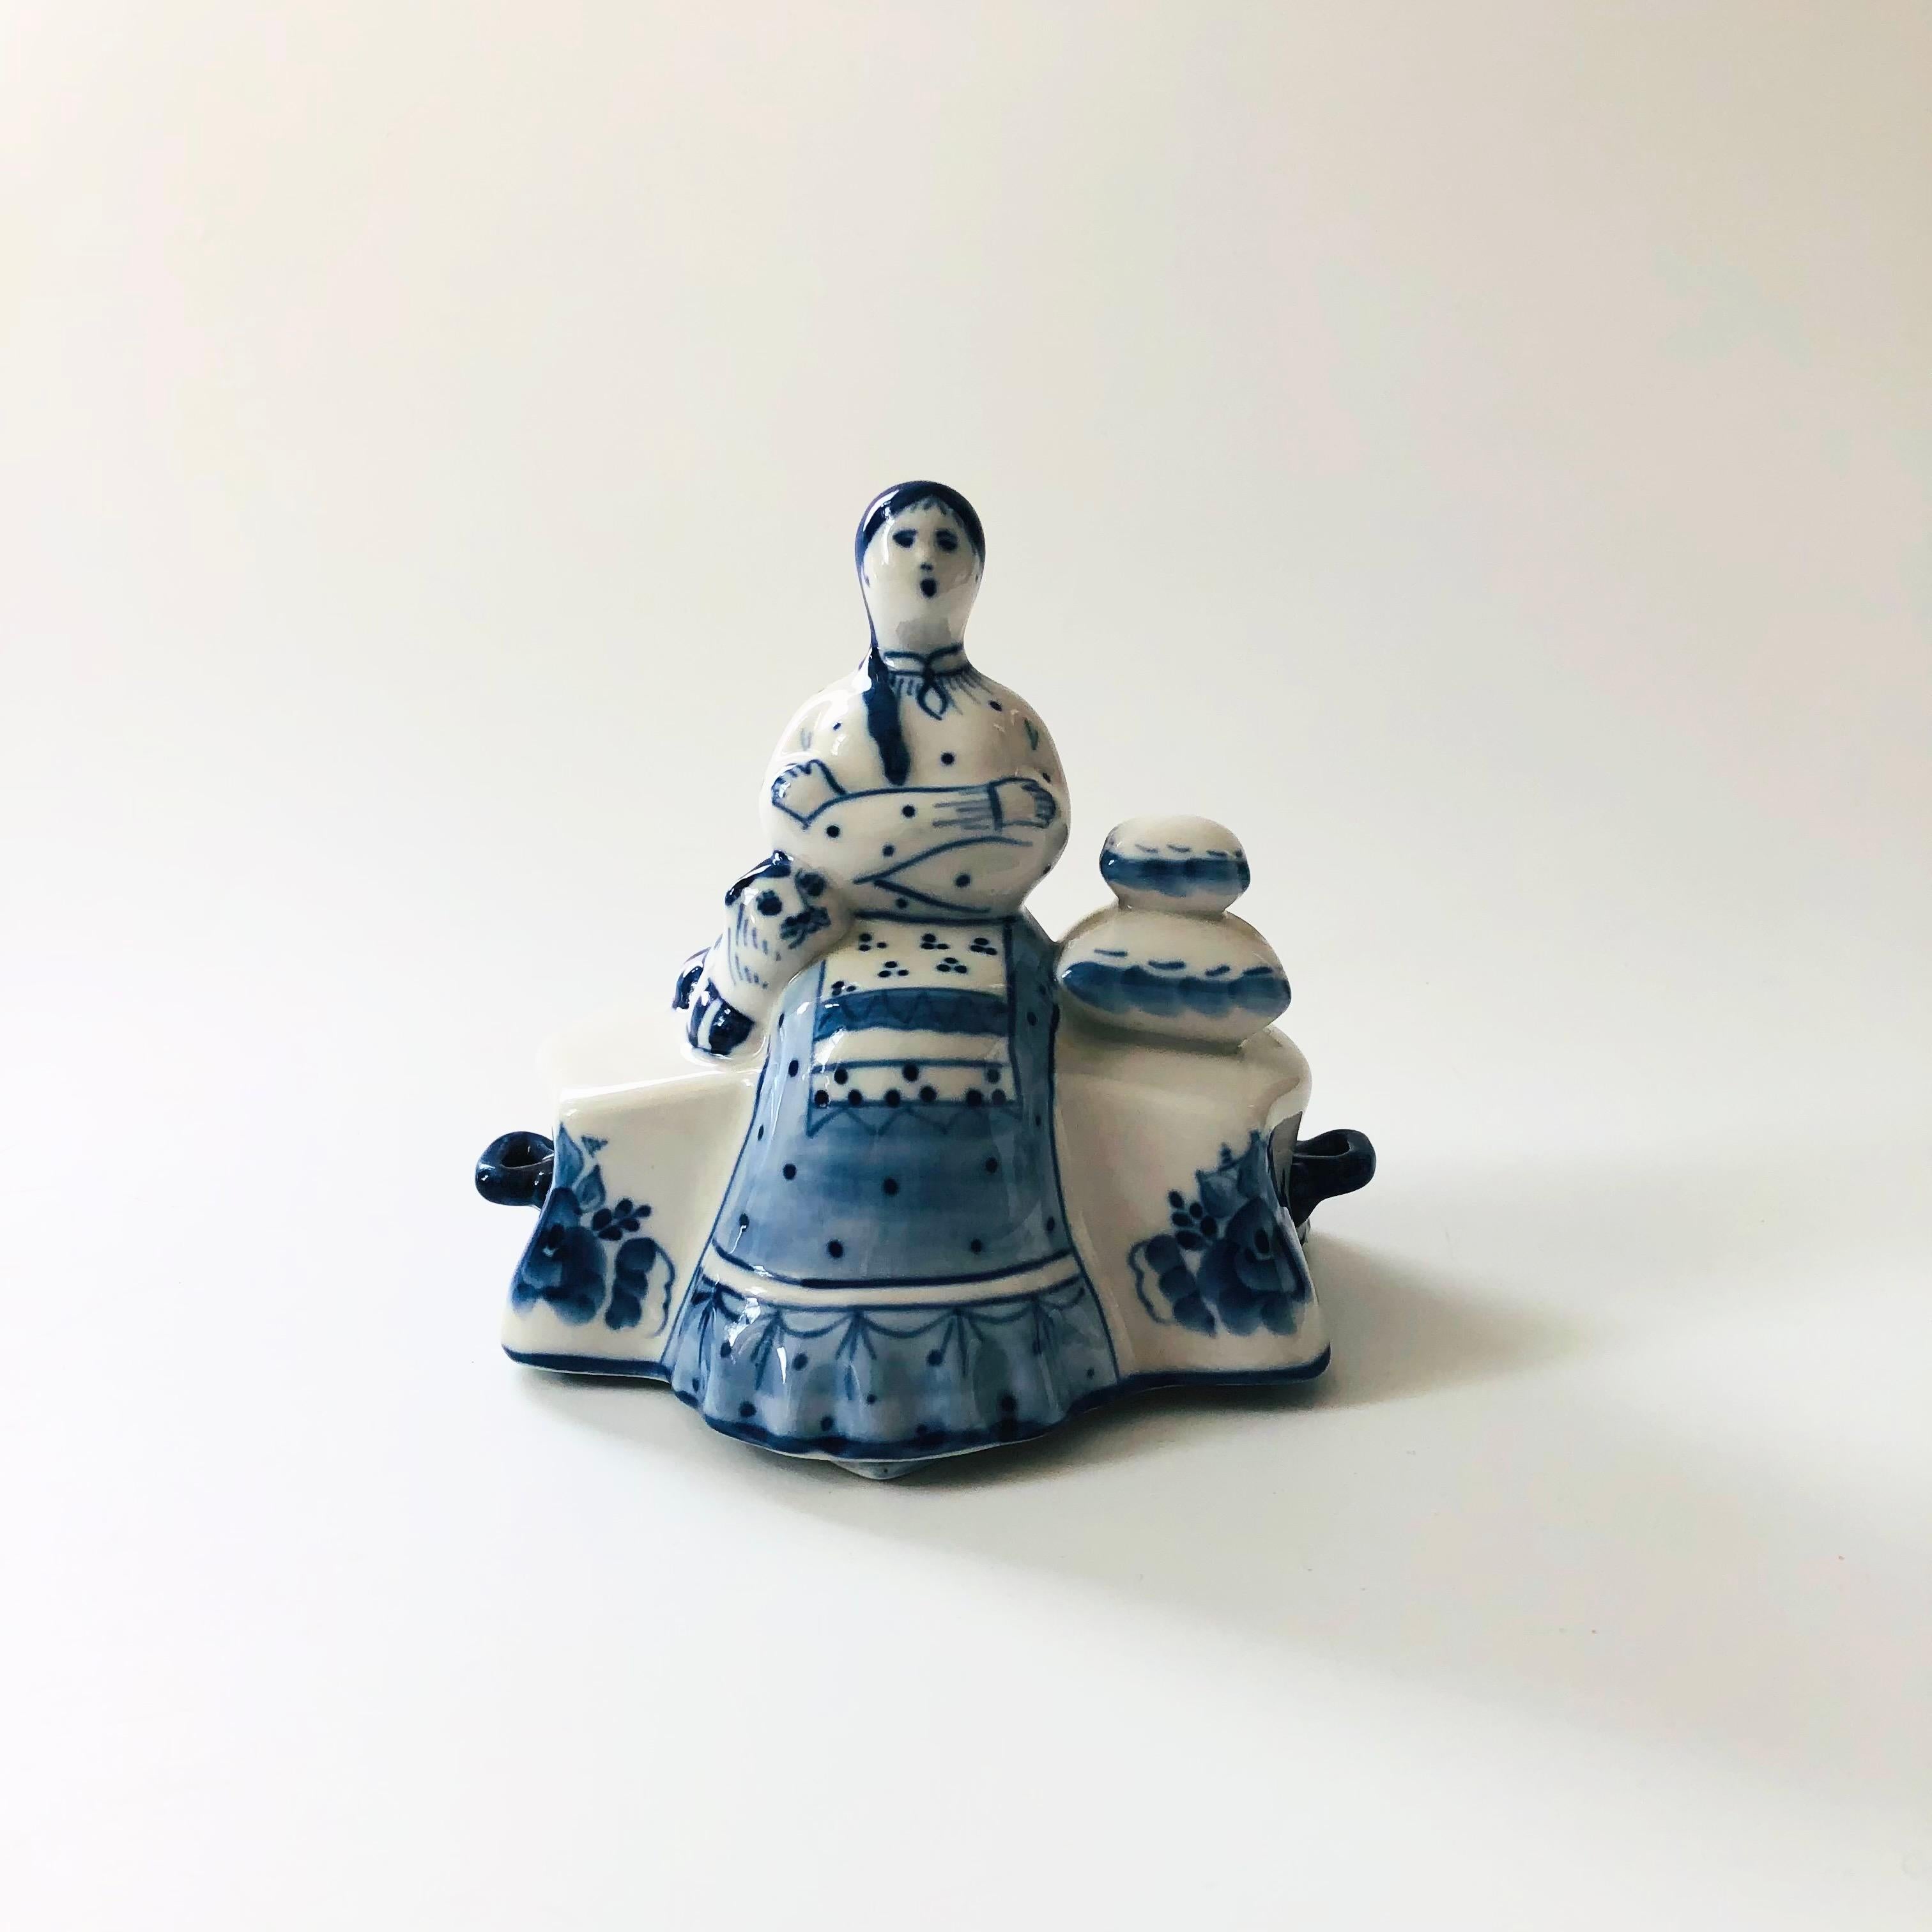 A vintage porcelain butter dish in the shape of a woman. Blue and white glazes with beautiful hand painted detailing throughout. A cat sits on the left side of the woman and a stack of pillows sits to the right. The top lifts off to reveal the dish